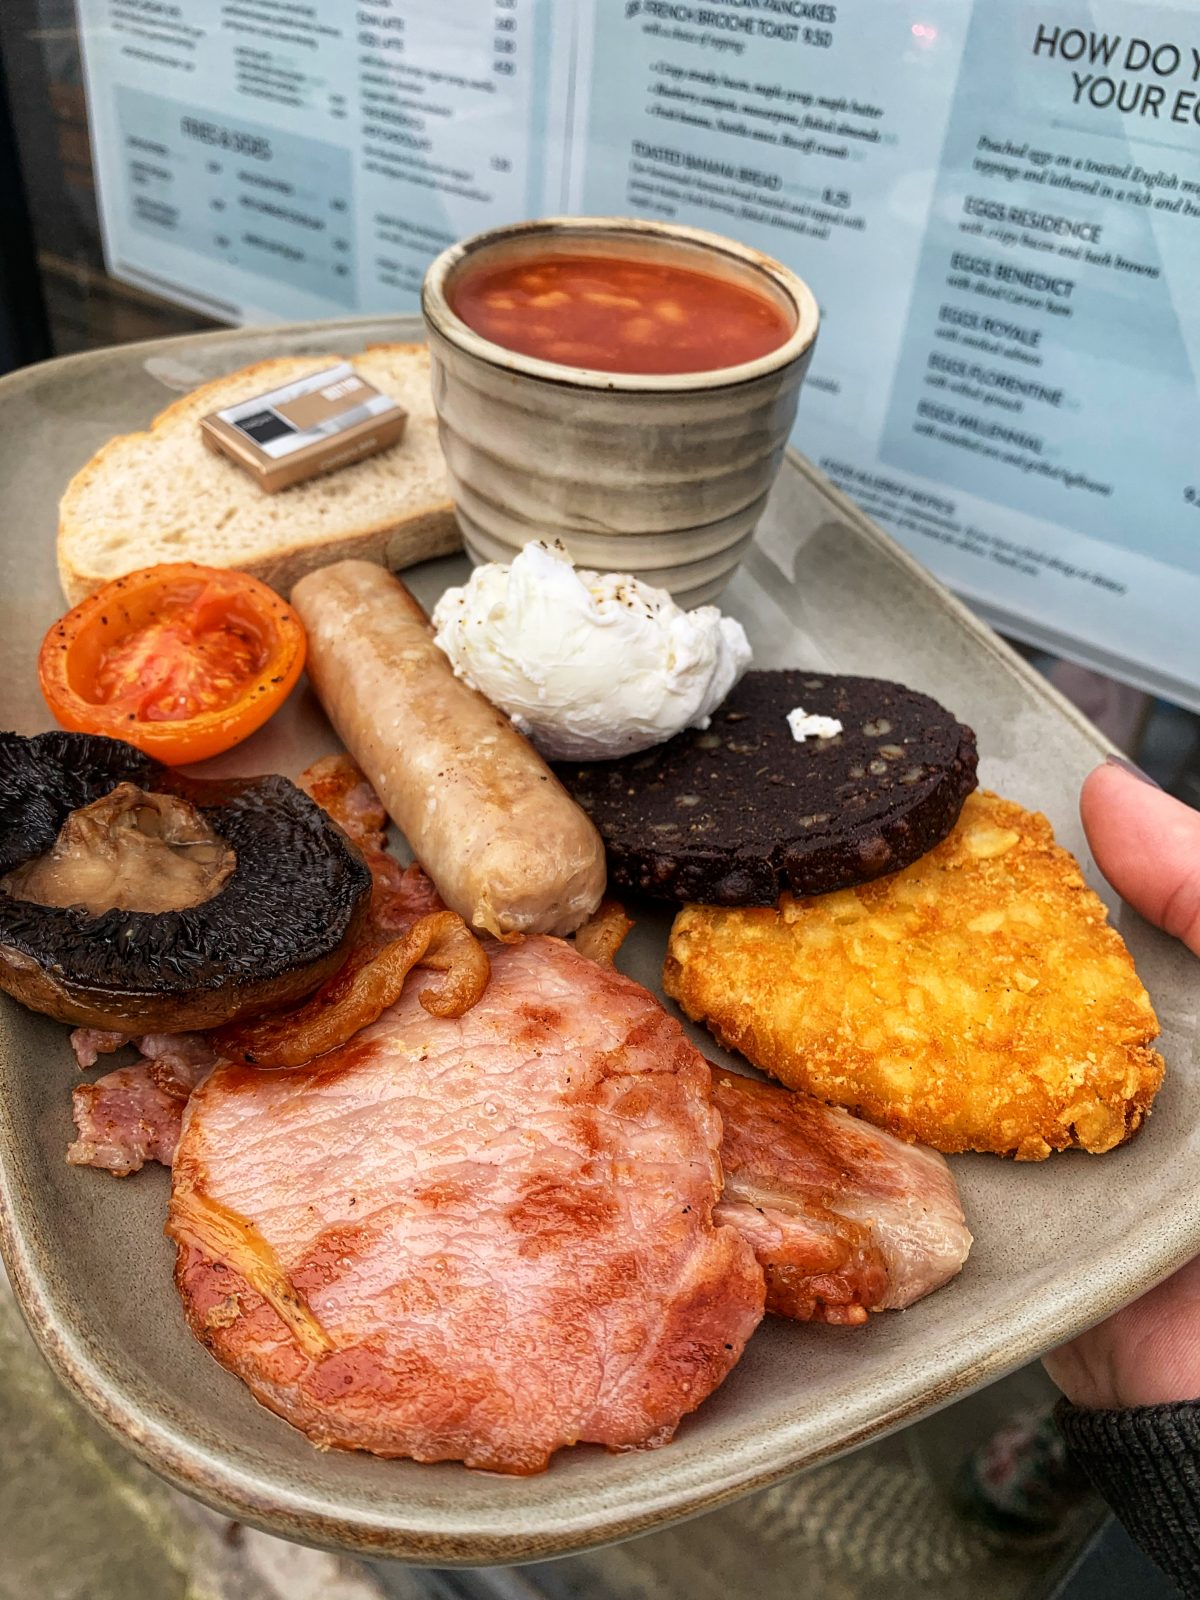 A full English breakfast with bacon, egg, black pudding, hash brown, tomato, mushroom, sausage, beans and bread.